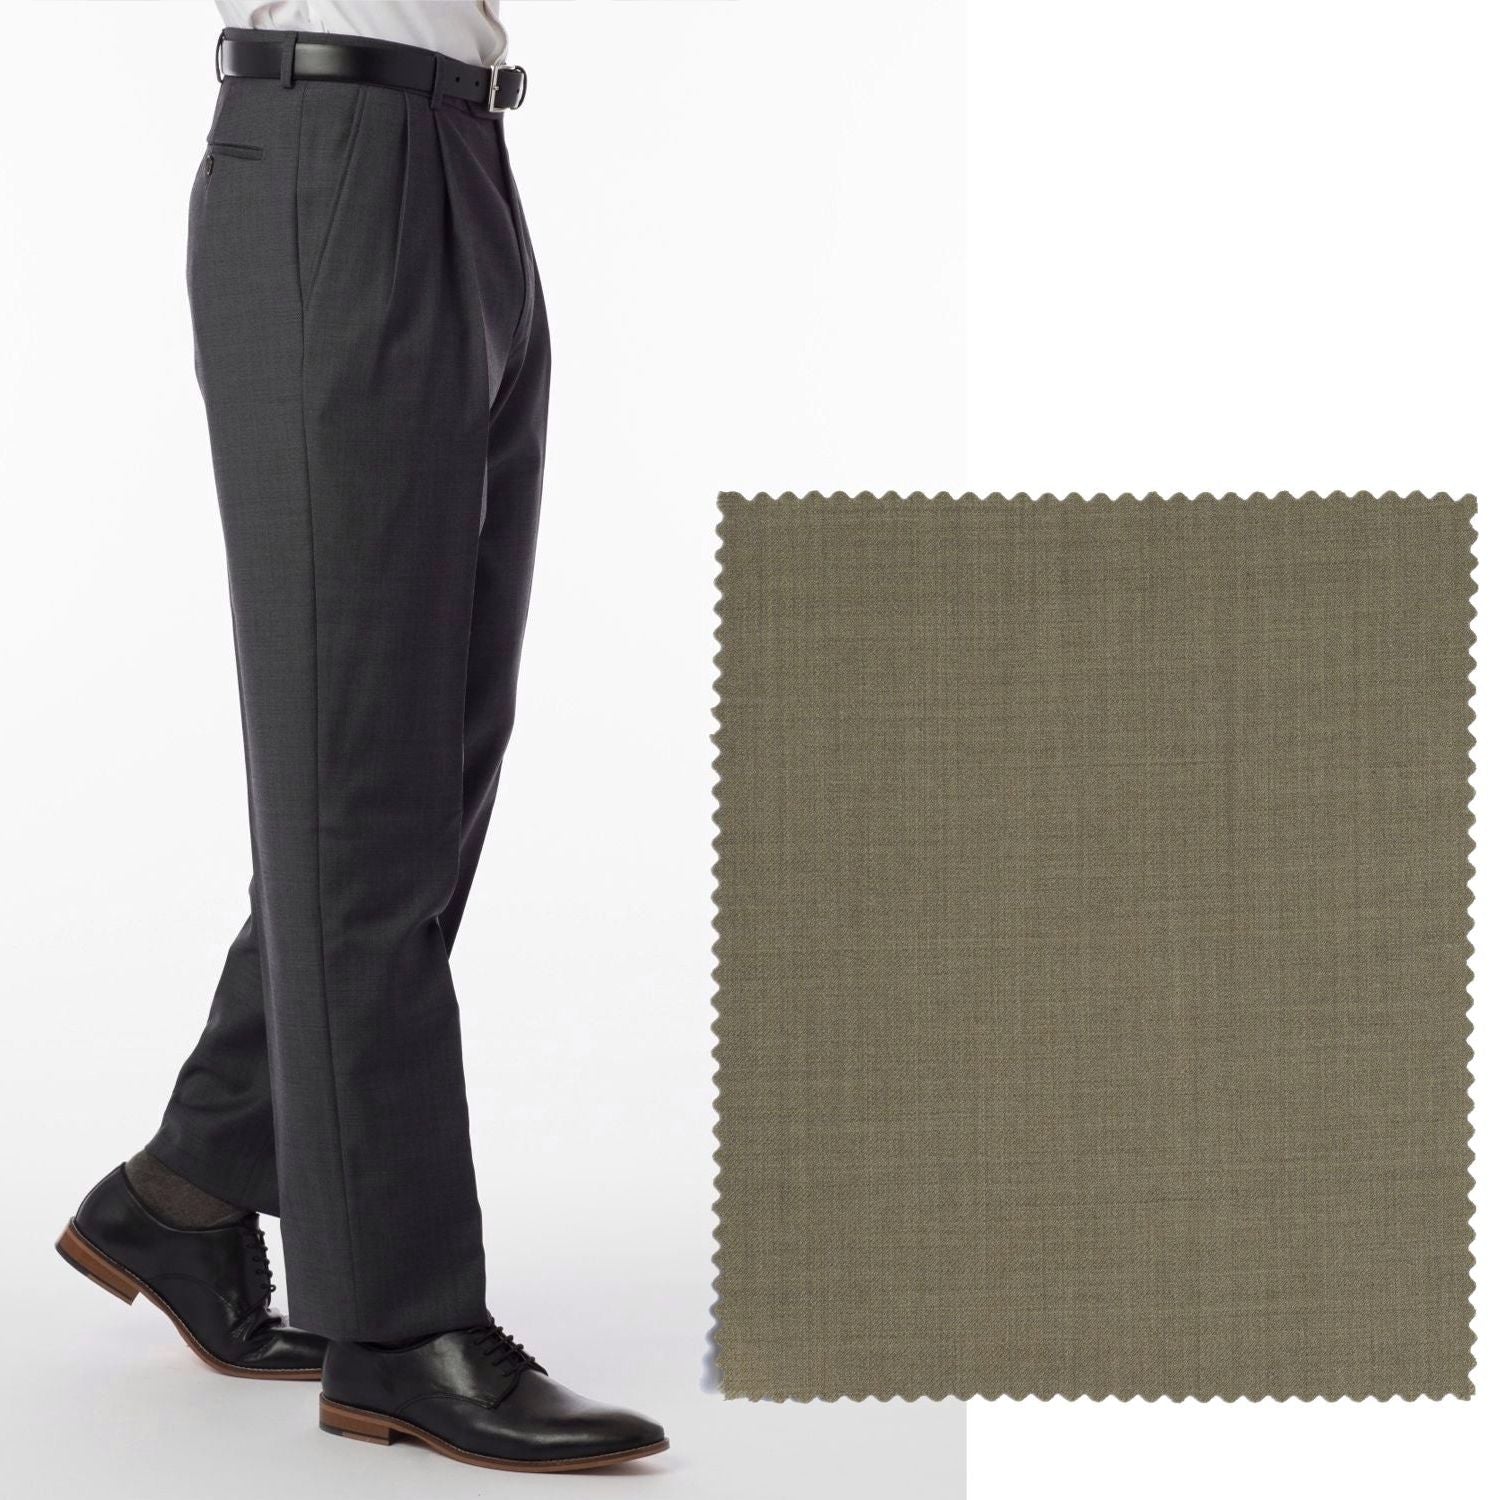 Super 120s Wool Travel Twill Comfort-EZE Trouser in Sand (Manchester Pleated Model) by Ballin